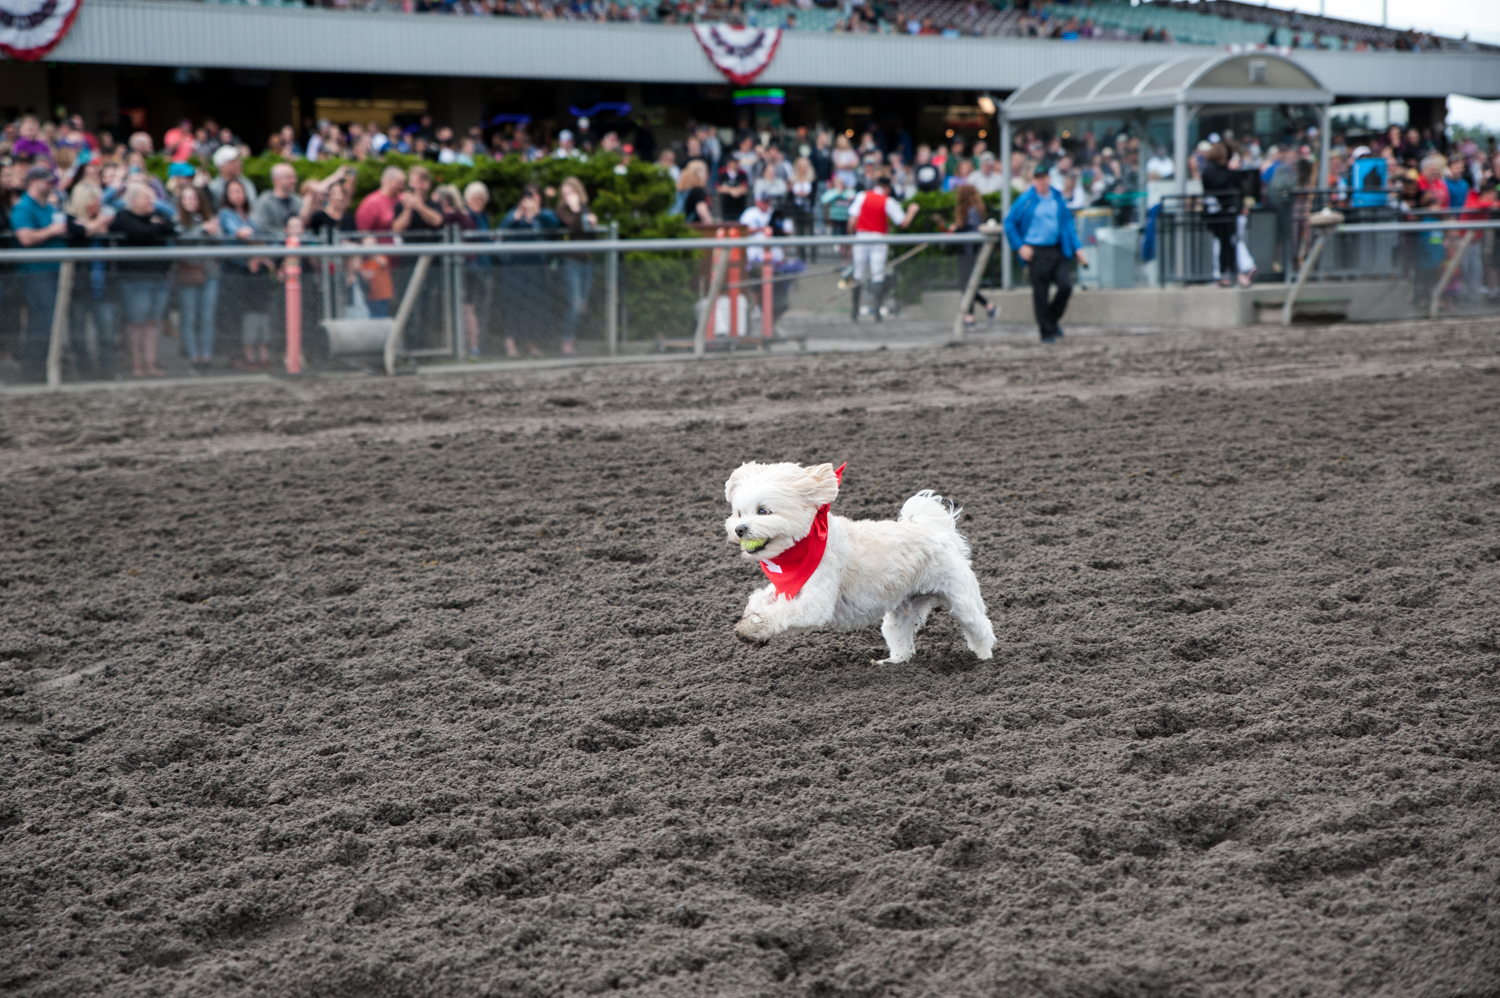 Photos: Hot dog! It's the Wiener Dog Races at Emerald Downs Racetrack | Seattle Refined